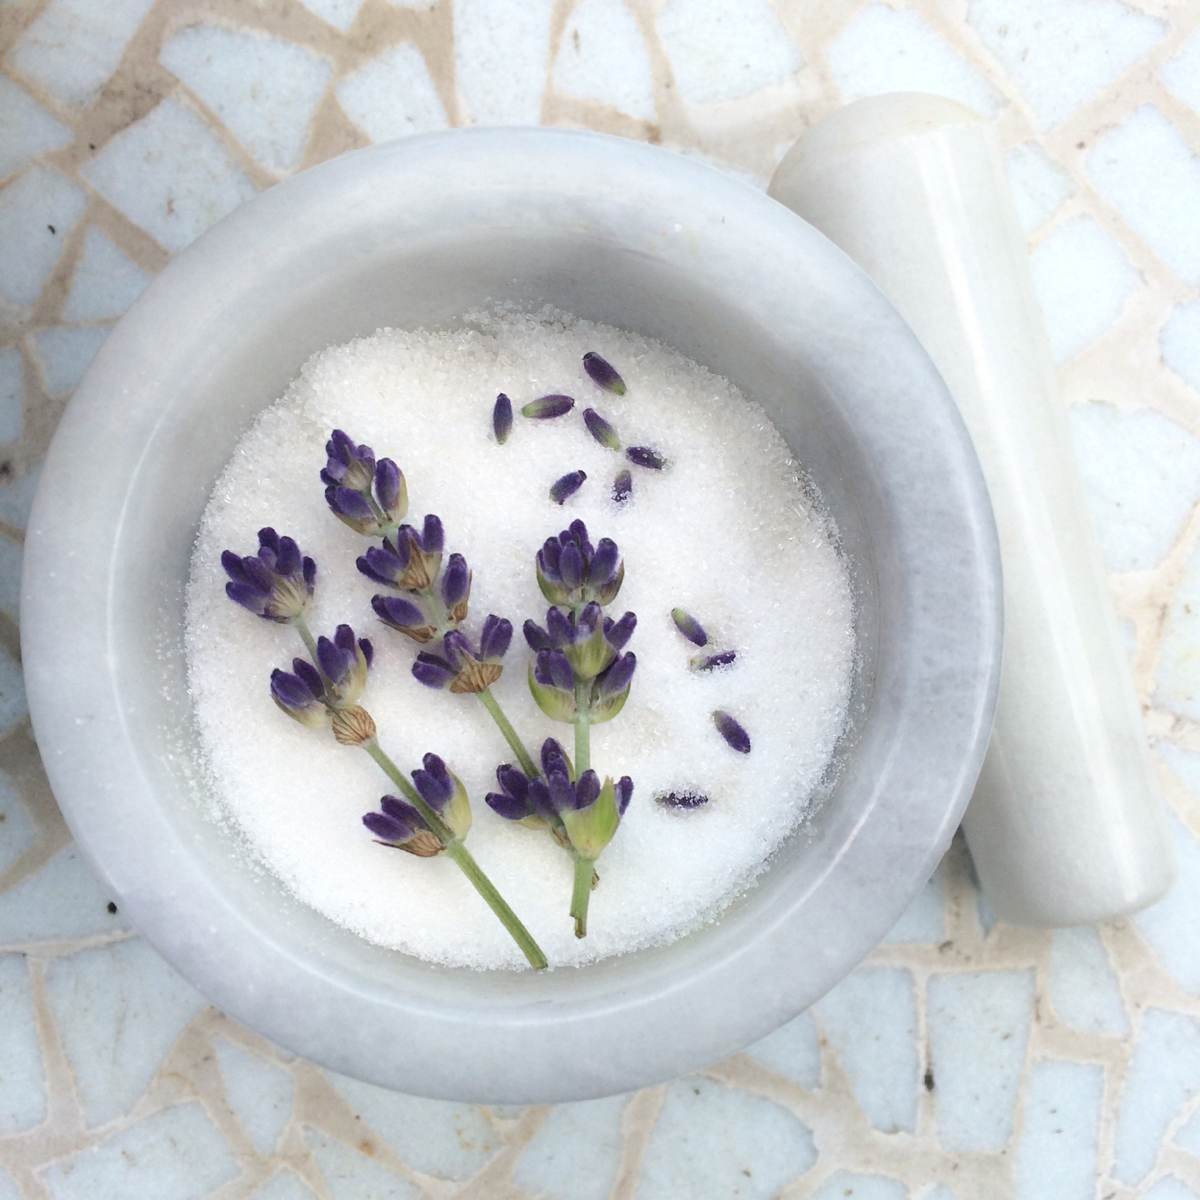 Cooking with Lavender – Beyond Aromatherapy